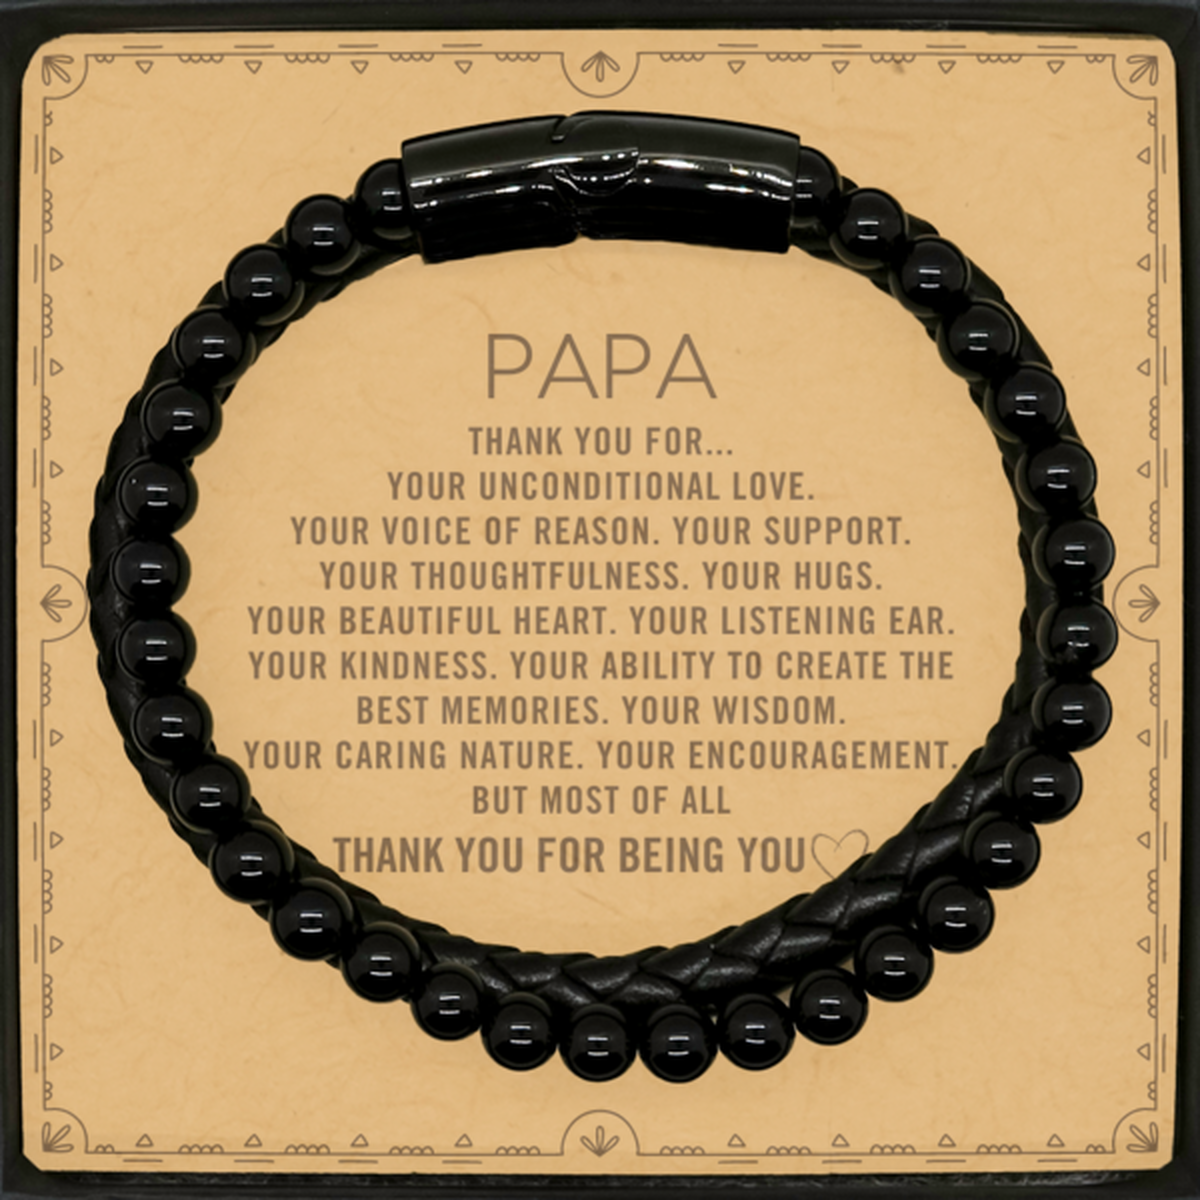 Papa Stone Leather Bracelets Custom, Message Card Gifts For Papa Christmas Graduation Birthday Gifts for Men Women Papa Thank you for Your unconditional love